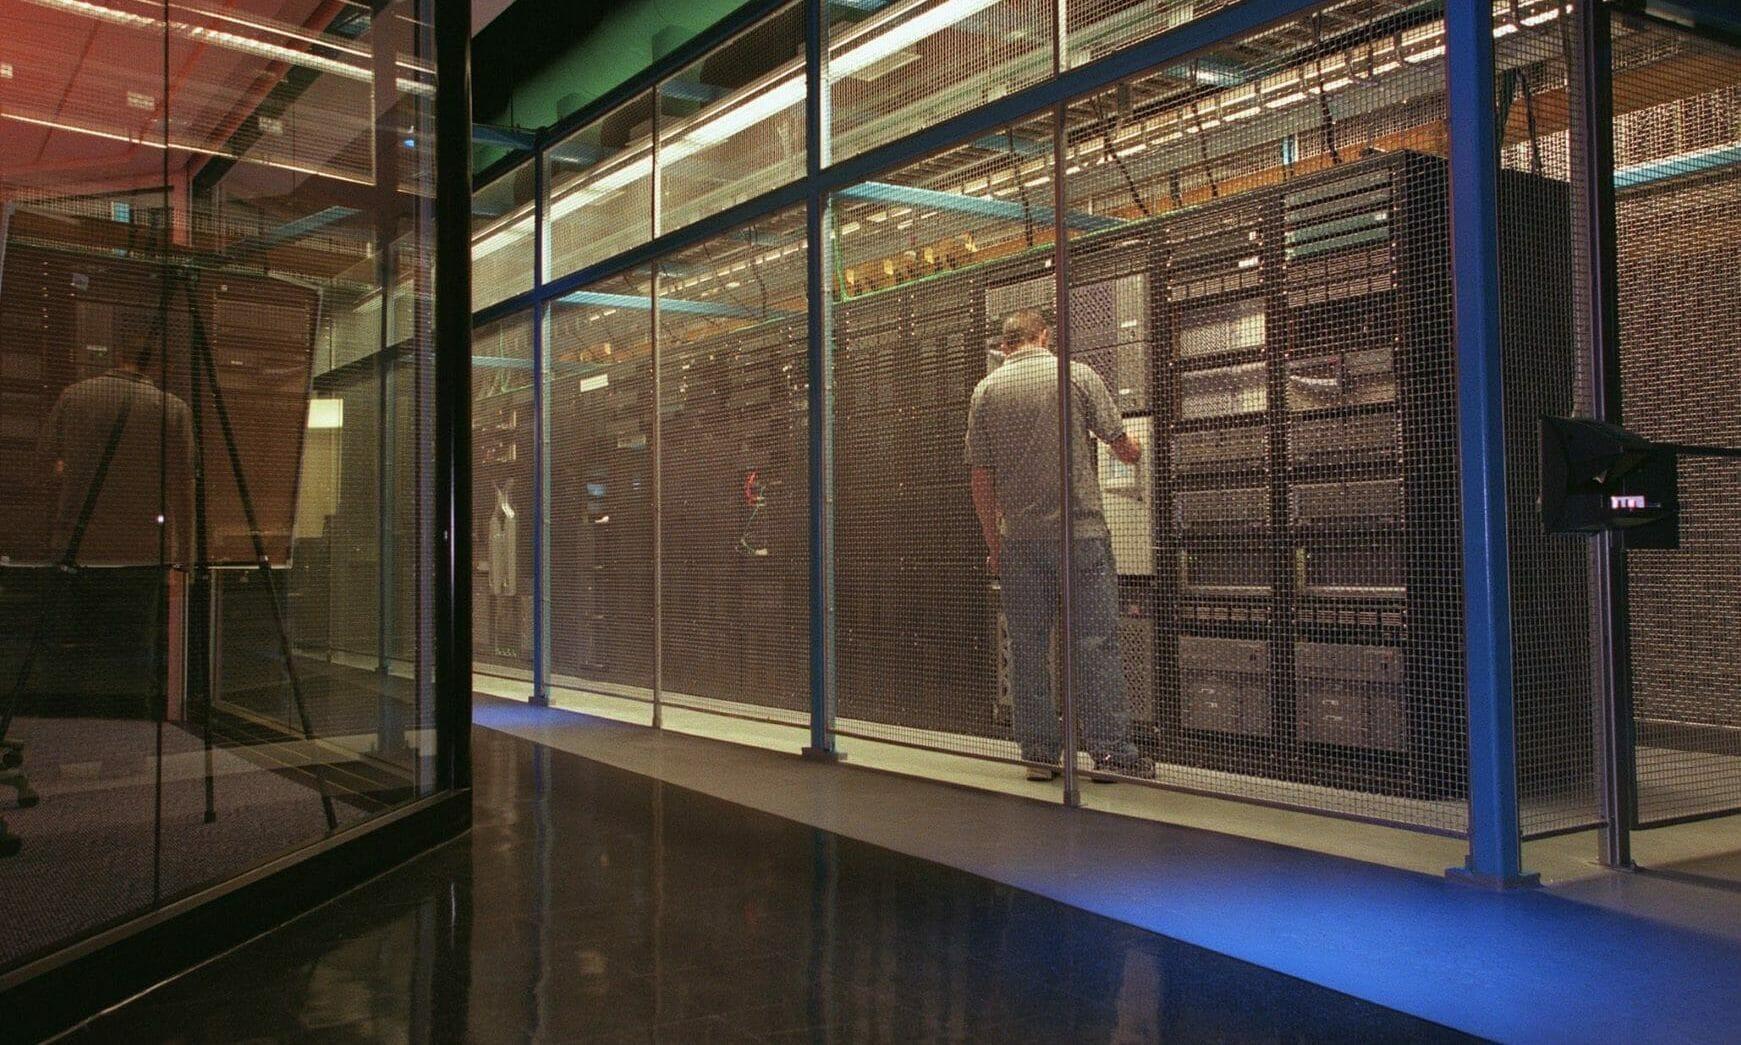 Inside a heavily secured data center.
(MediaNews Group/The Mercury News via Getty Images / Contributor)